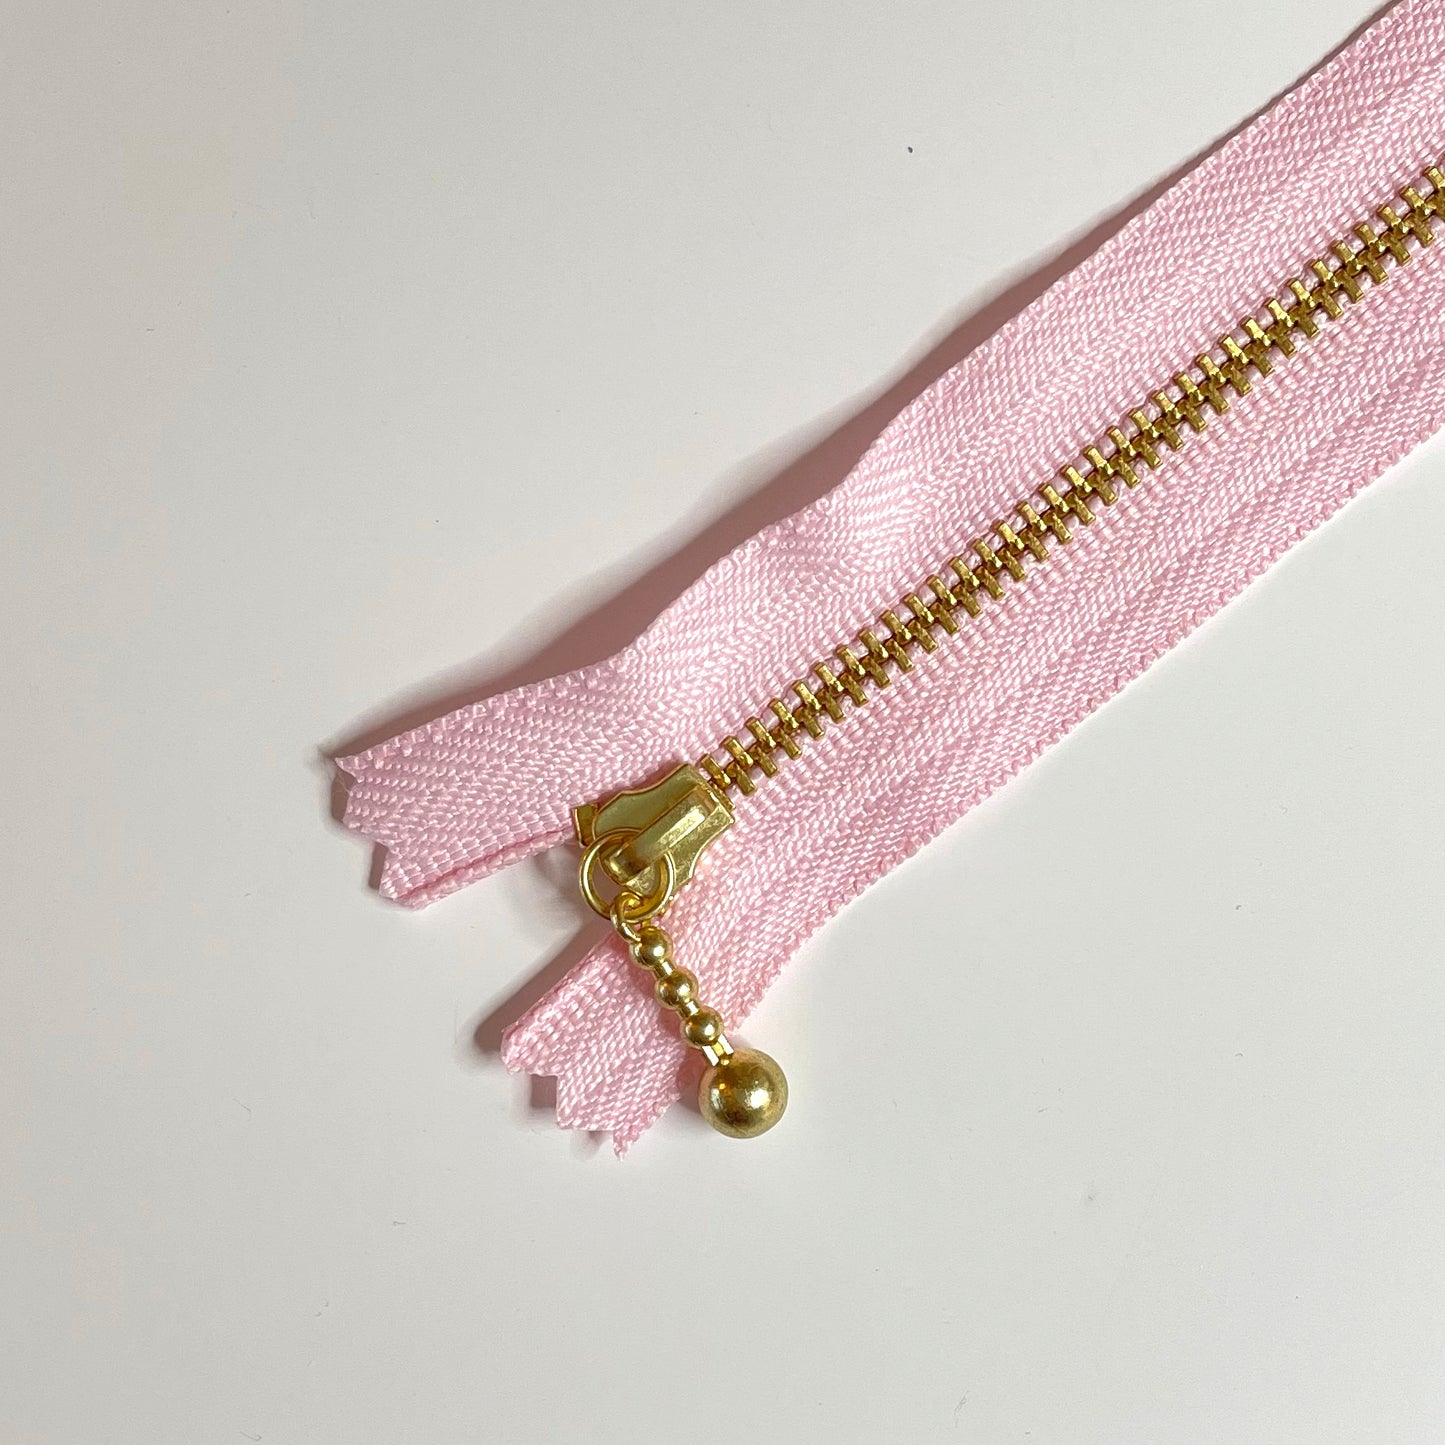 YKK Metalic Zippers with Water-drop Pull - light pink (6 1/4" -16CM)